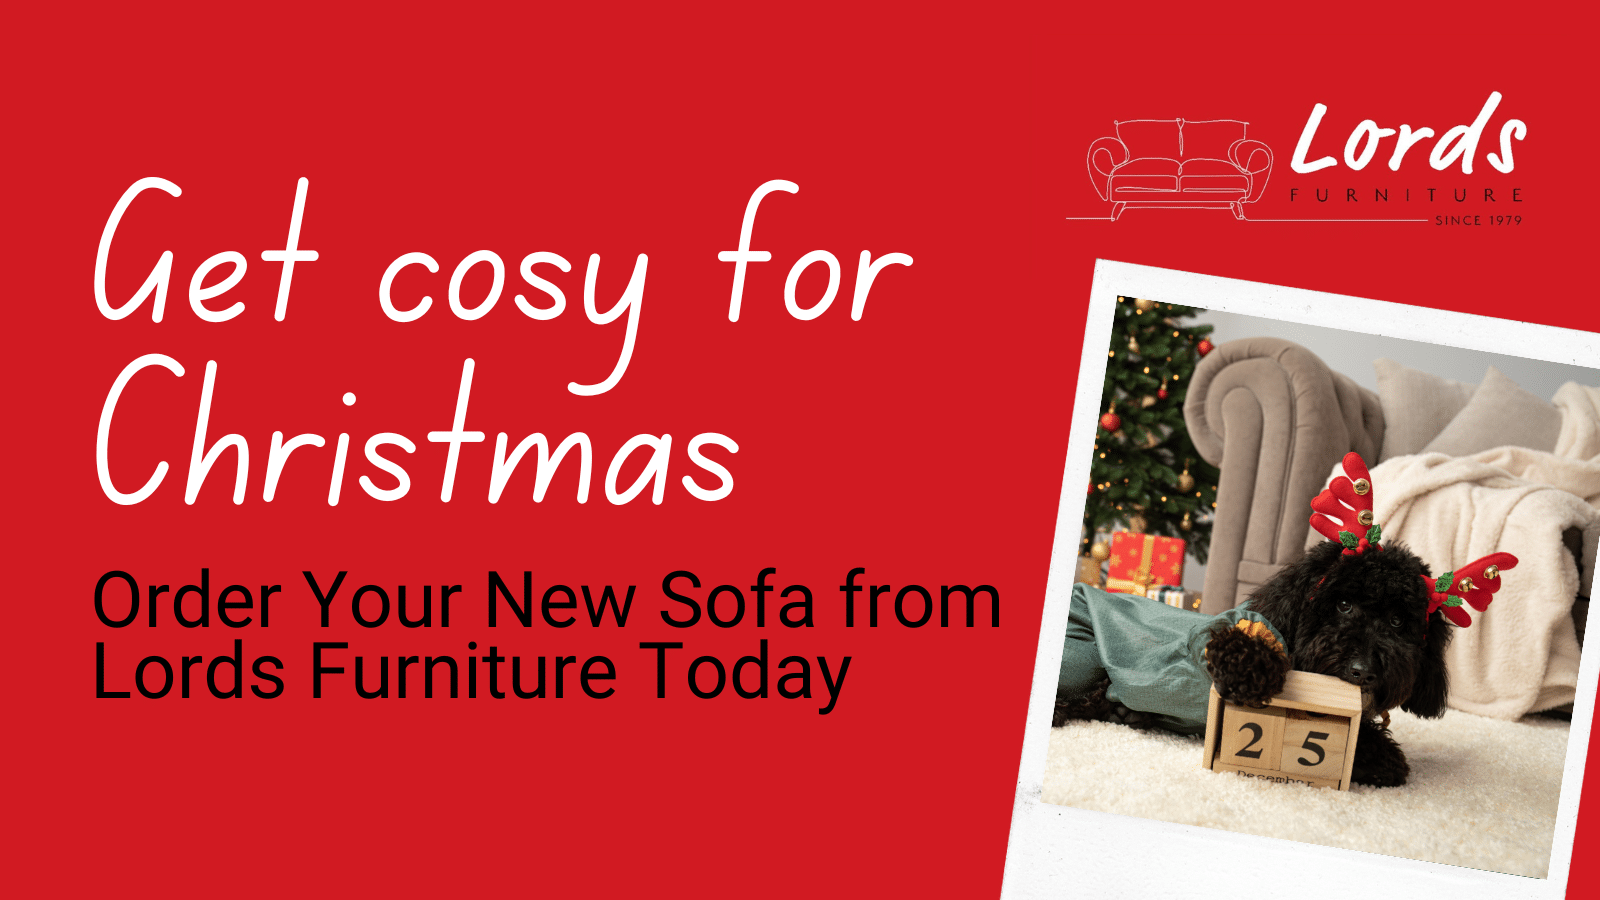 Get Cosy for Christmas Order Your New Sofa from Lords Furniture Today!